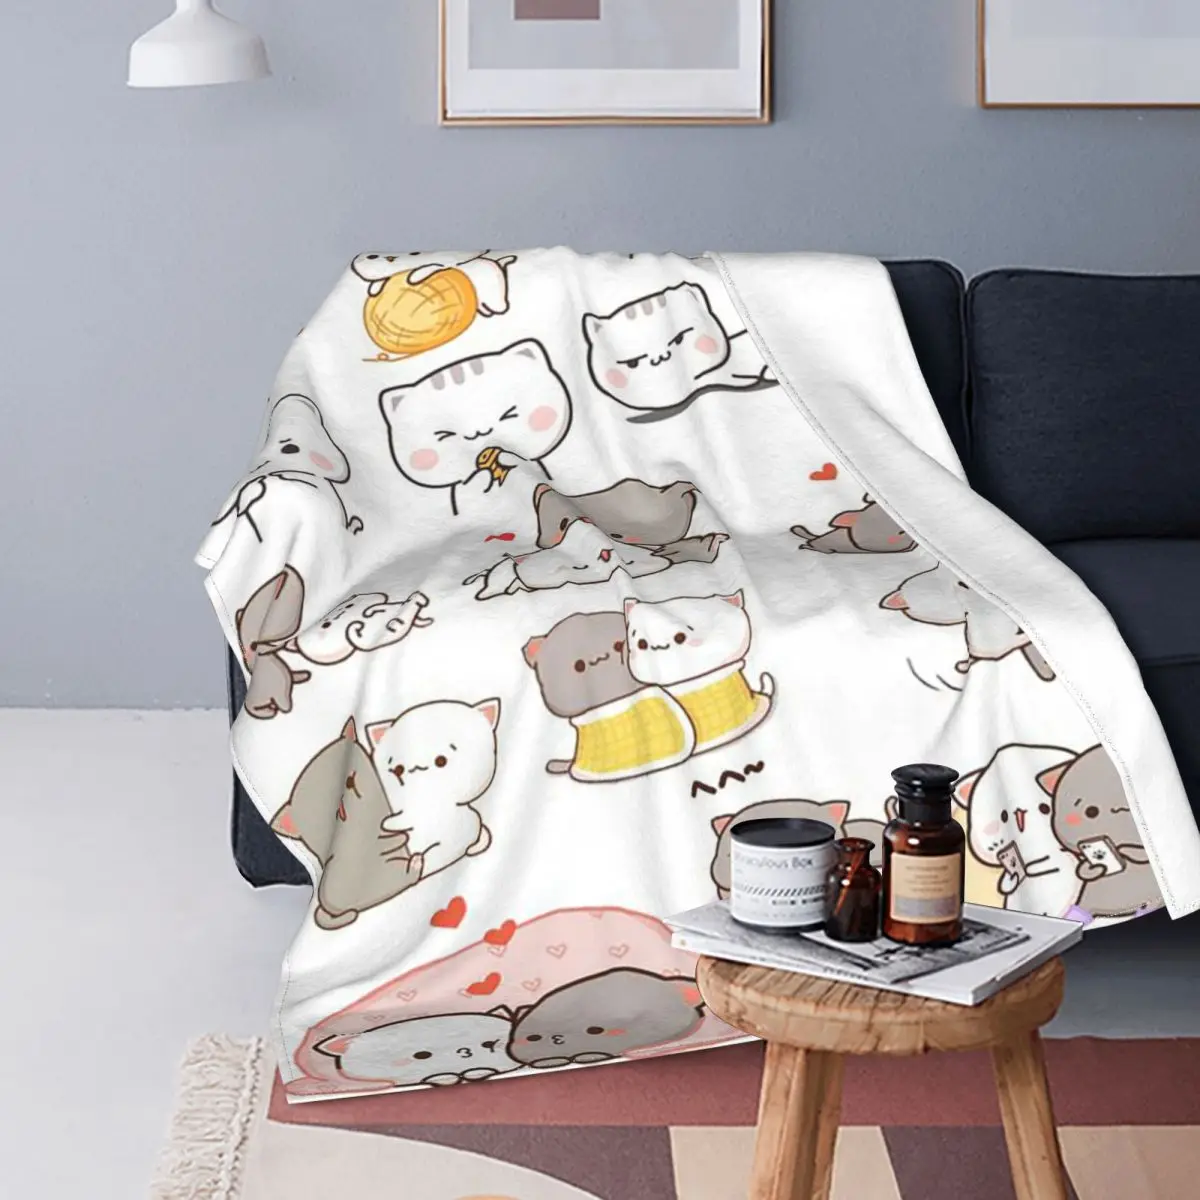 Peach And Goma Collage Blankets Fleece Winter Cartoon Animal Gift Multi-function Ultra-Soft Throw Blankets for Home Travel Quilt